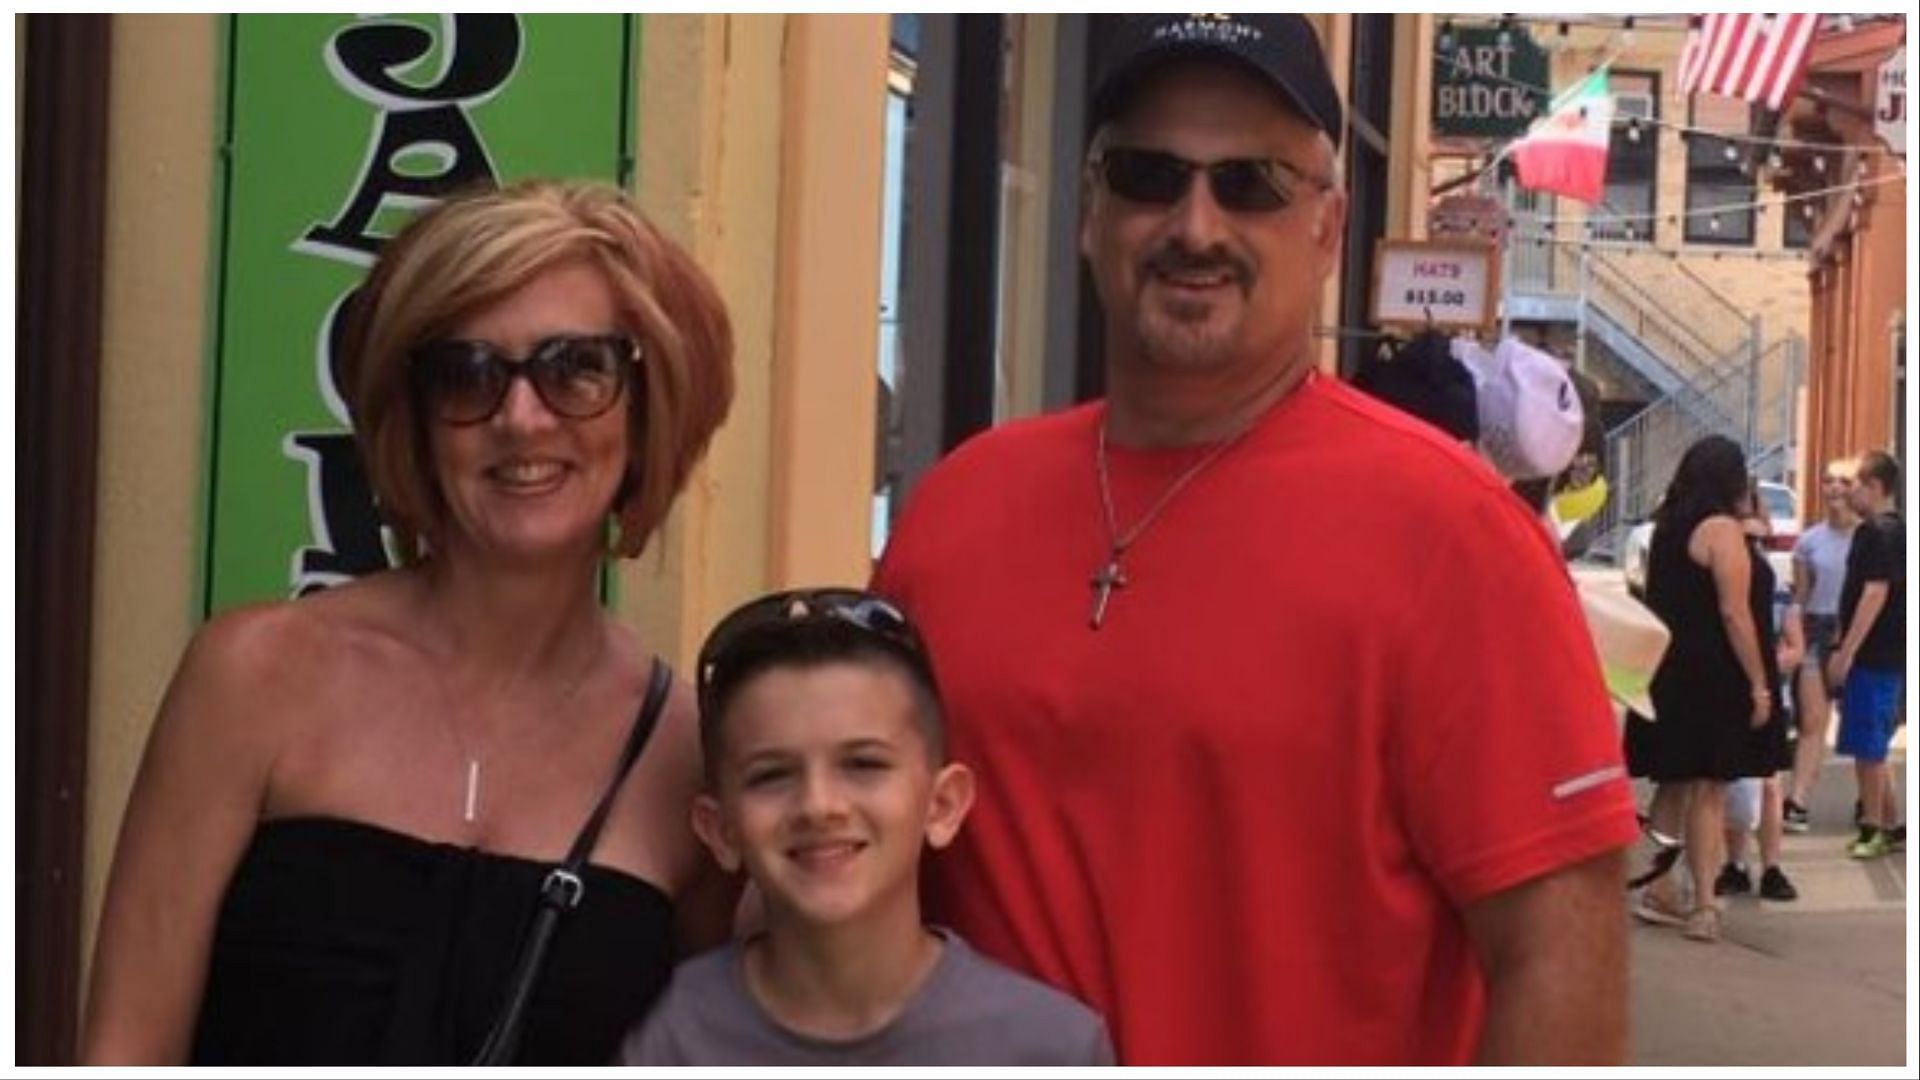 Peter Ventricelli killed his wife and son, and then shot himself, (Image via Bryan Benjamin/Twitter)